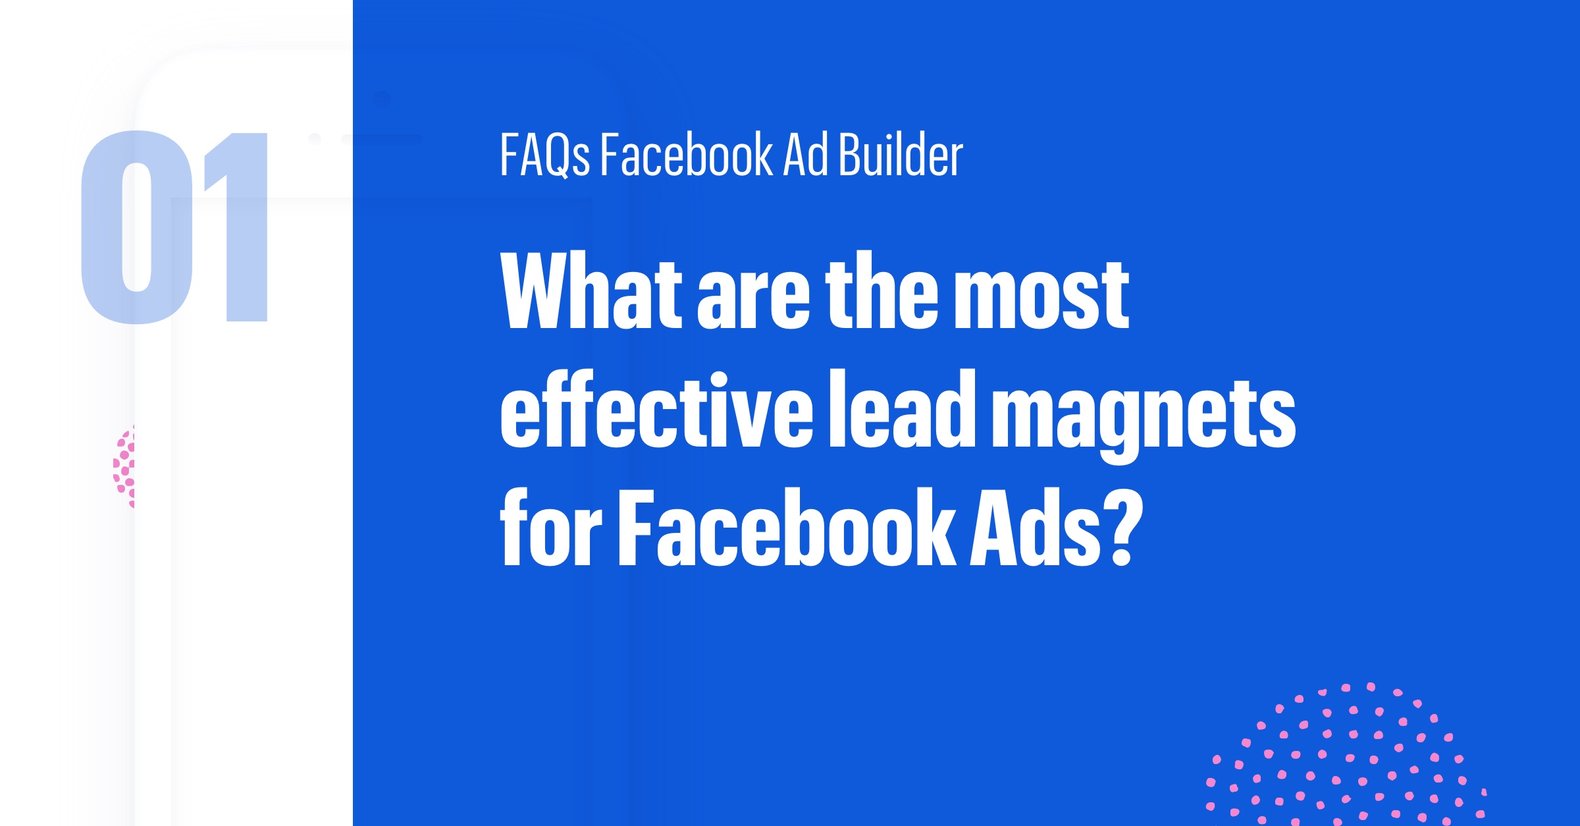 Leadpages Facebook Ad Lead Magnet for Lead Generation